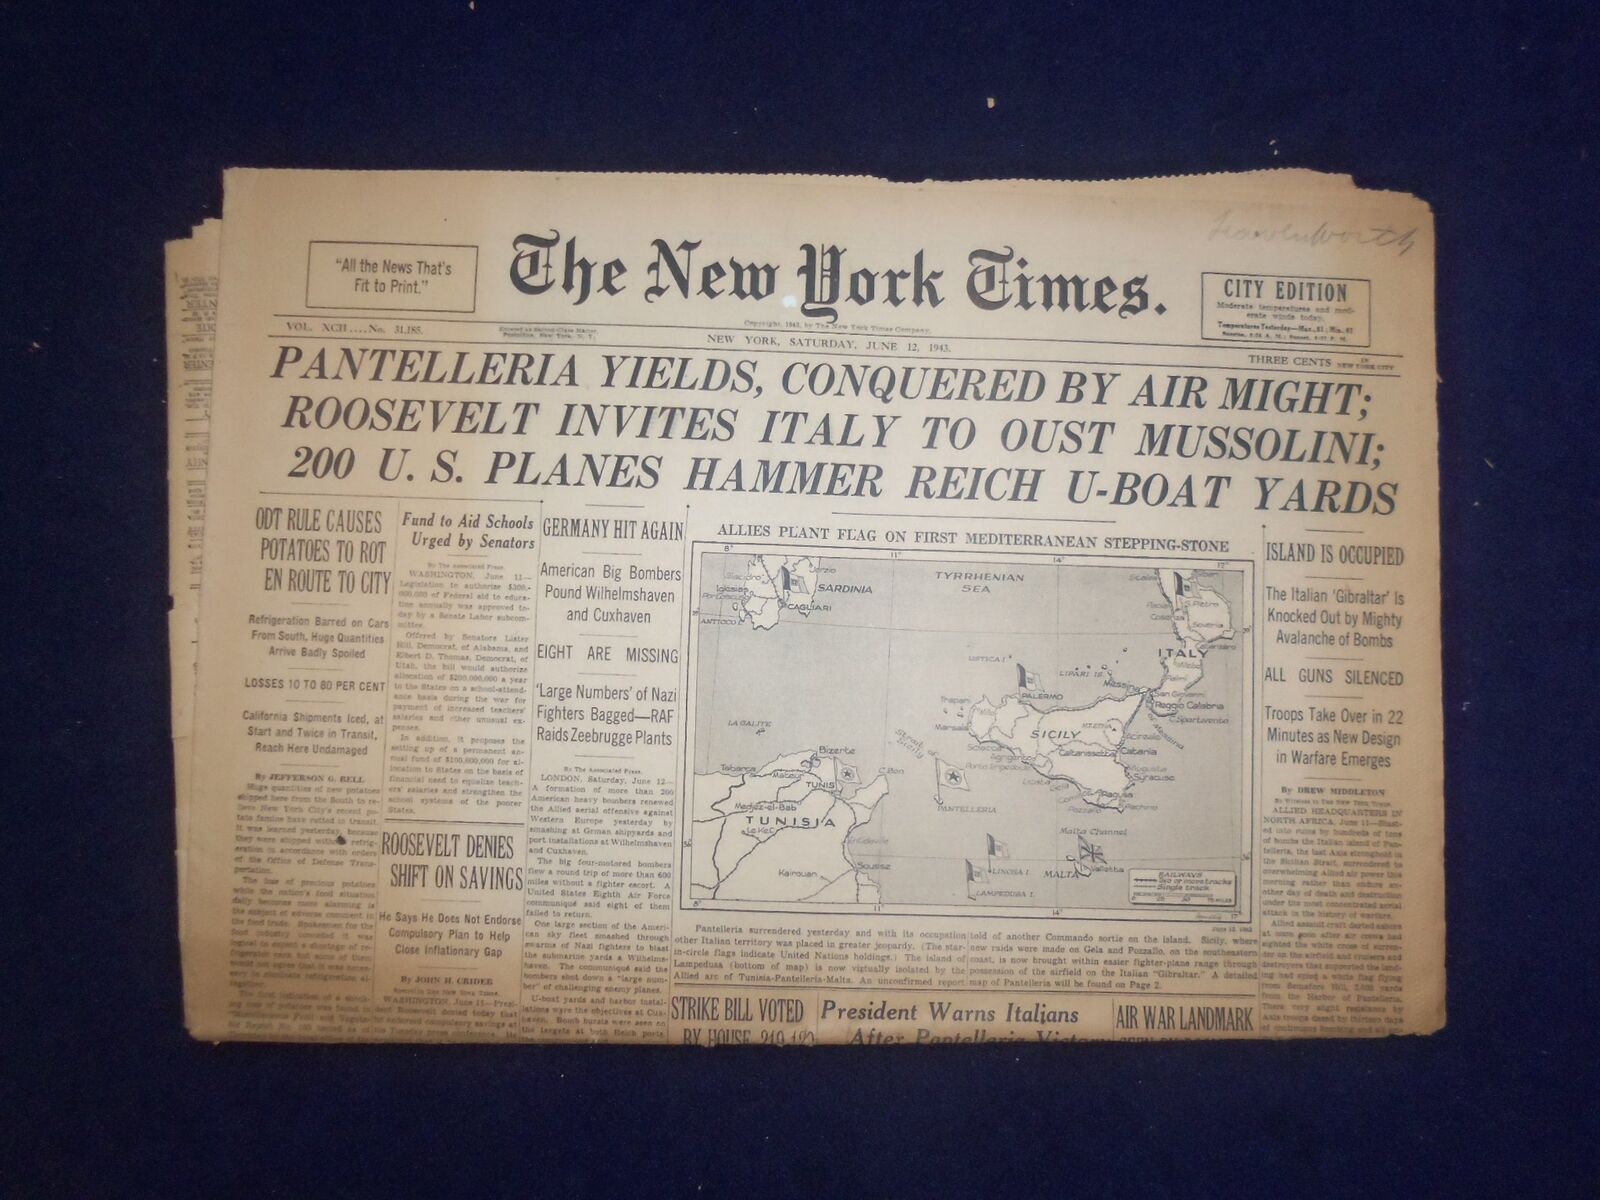 1943 JUNE 12 NEW YORK TIMES -PANTELLERIA YIELDS, CONQUERED BY AIR MIGHT- NP 6540